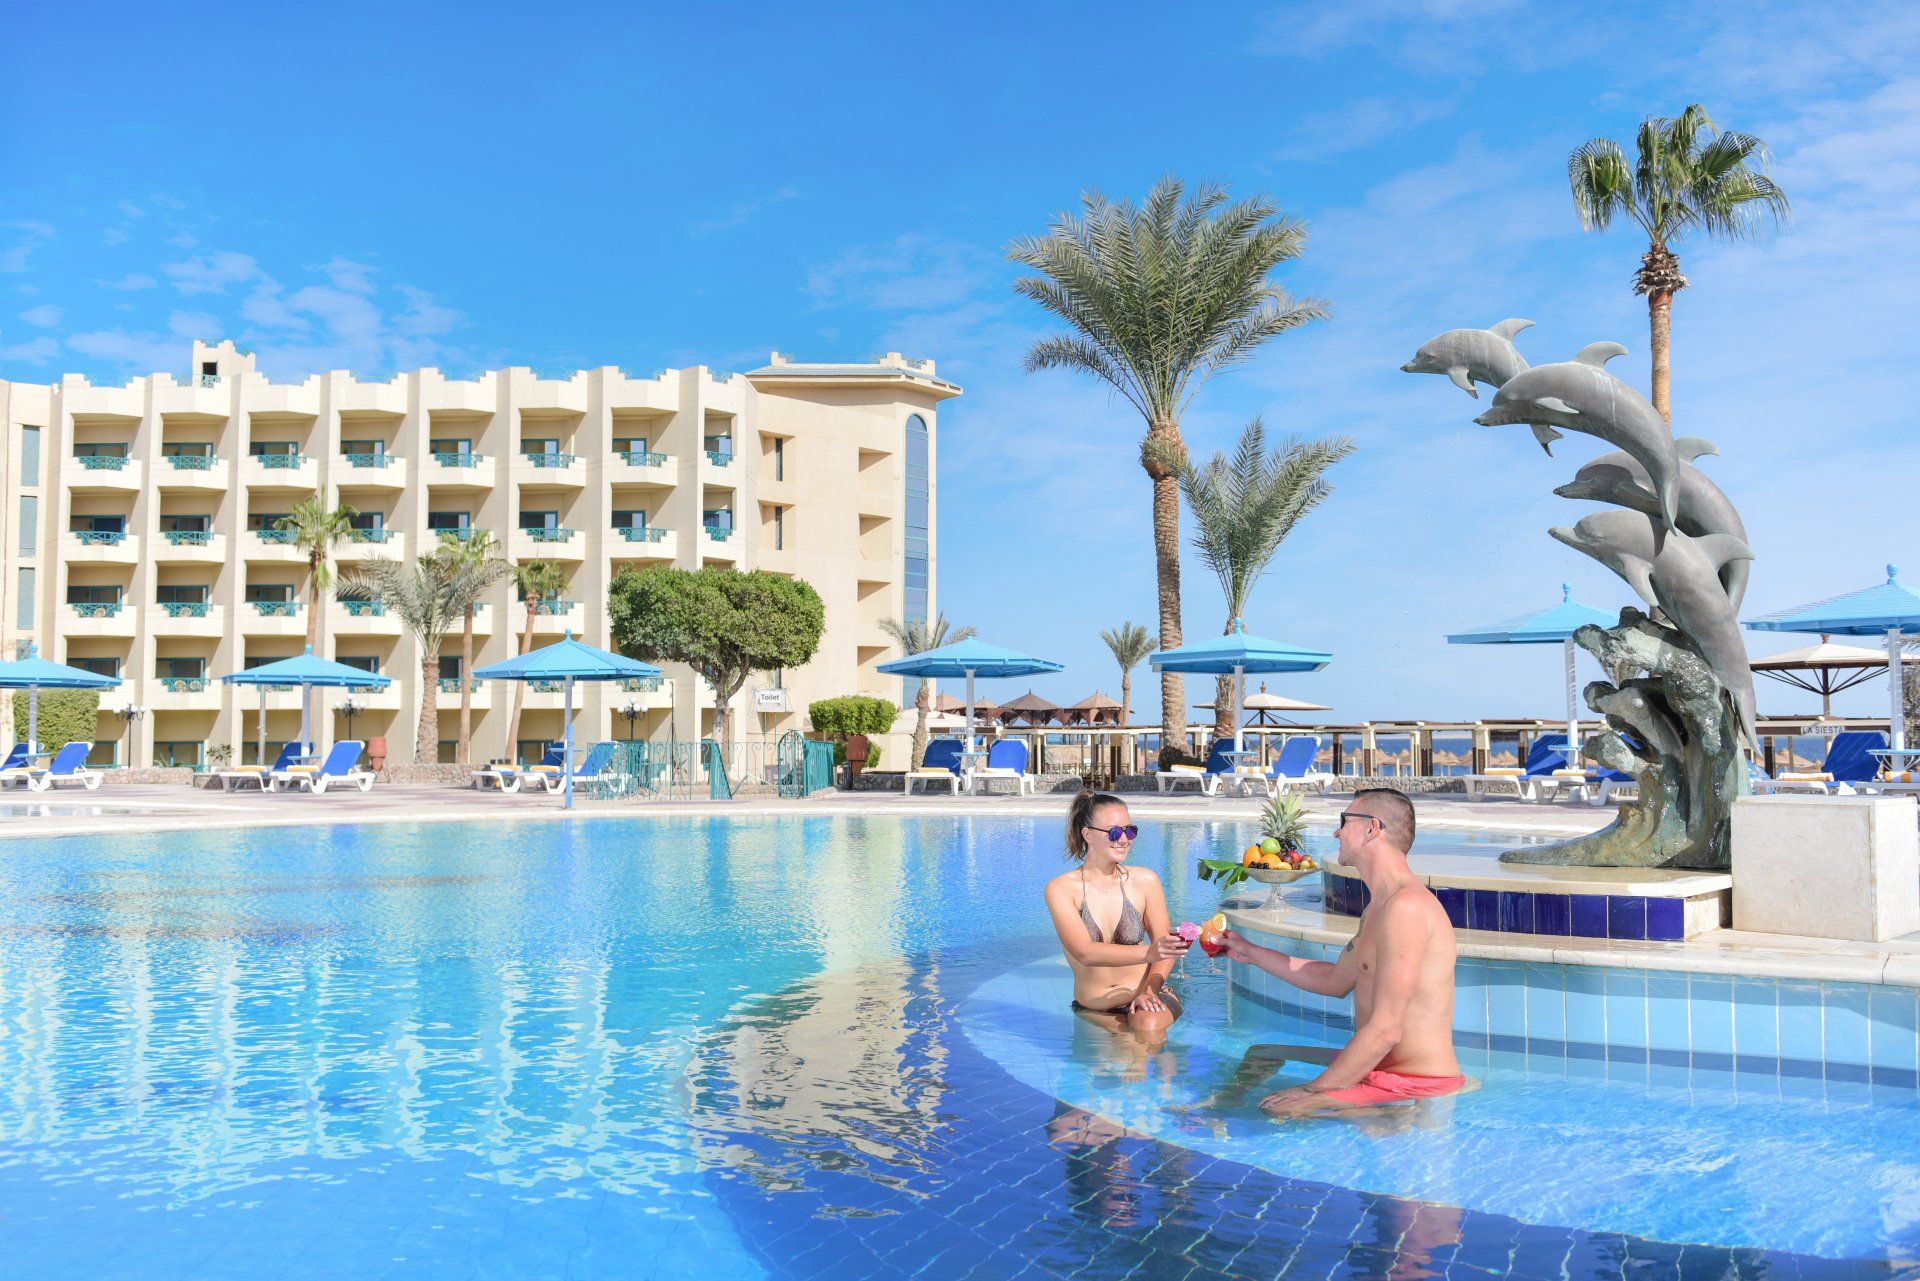 Hotelux Marina Beach Resort offers the best restaurants in Hurghada with local and international cuisines